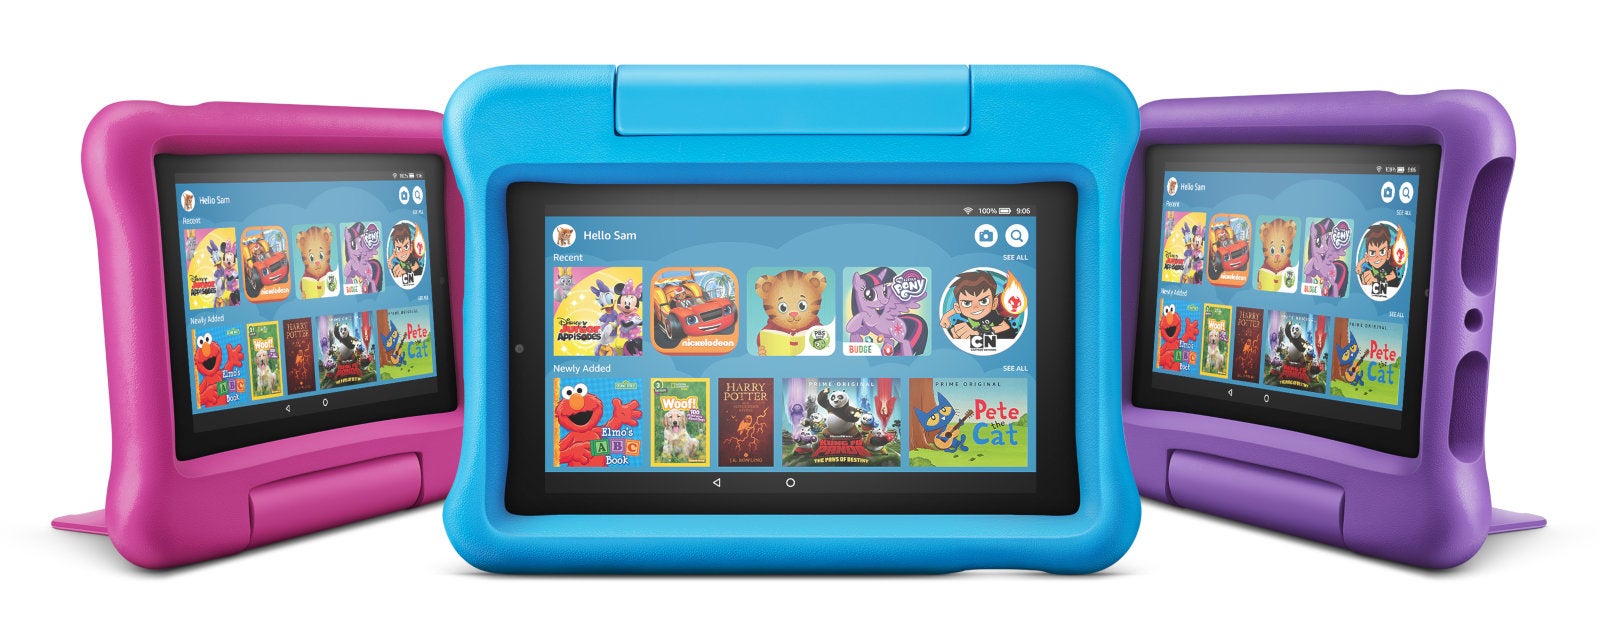 The all-new Fire 7 Kids Edition tablet - Amazon unveils improved Fire 7 and Fire 7 Kids Edition tablets, prices remains the same